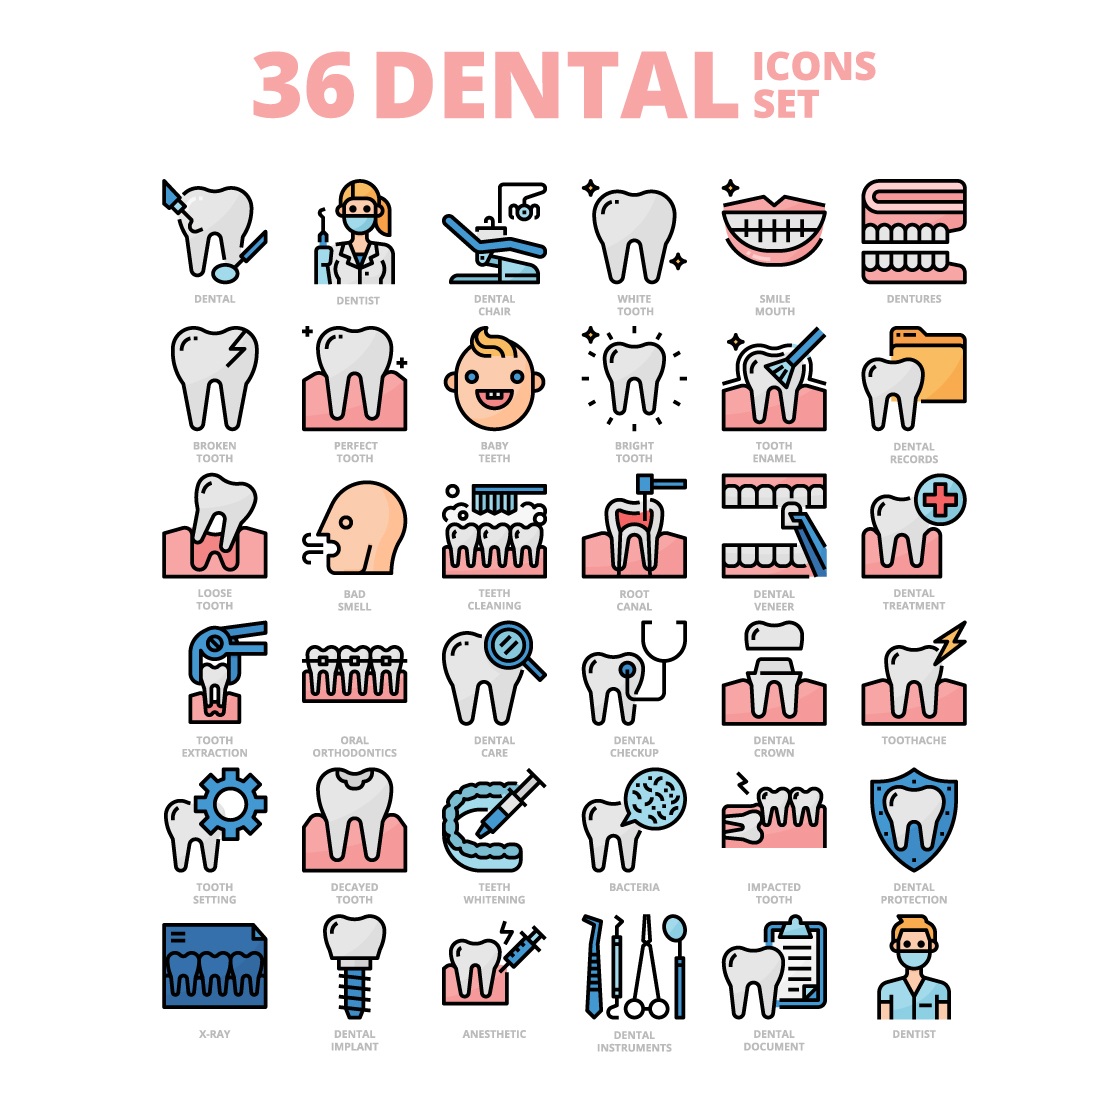 36 Dental Icons Set x 4 Styles cover image.